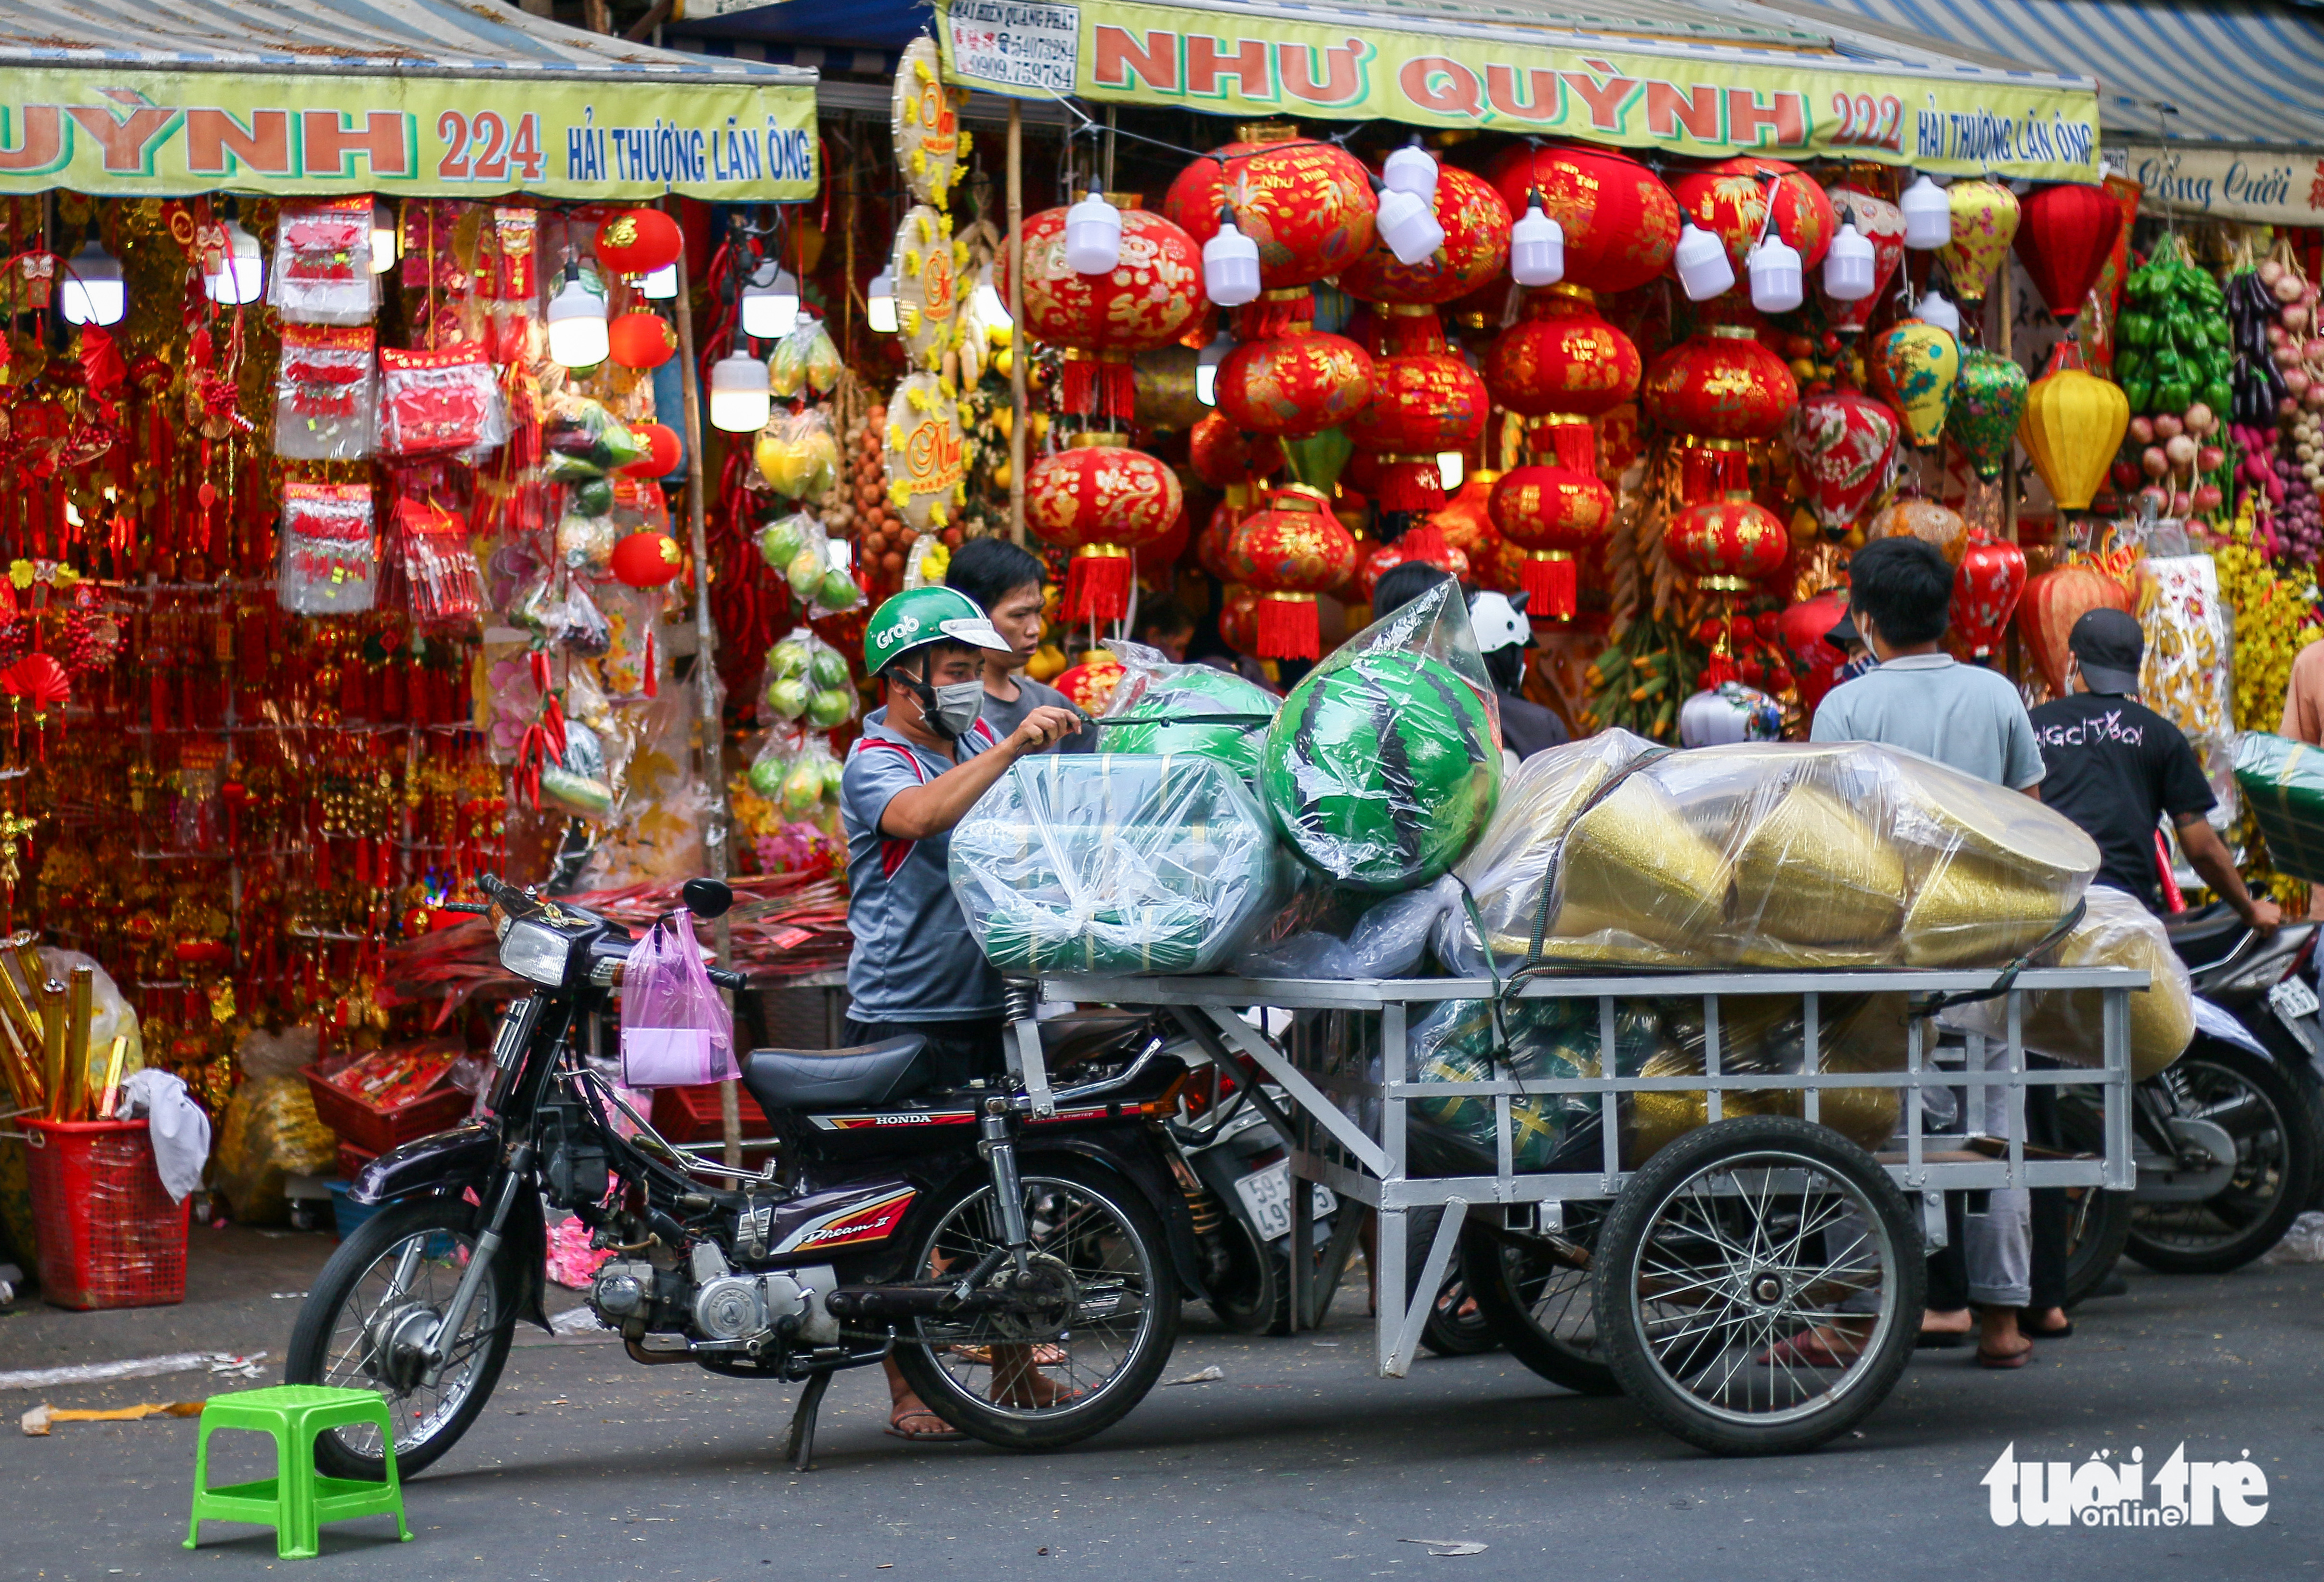 People shop for Lunar New Year decorations at ‘Tai loc’ Market on Hai Thuong Lan Ong Street in District 5, Ho Chi Minh City. Photo: Chau Tuan / Tuoi Tre